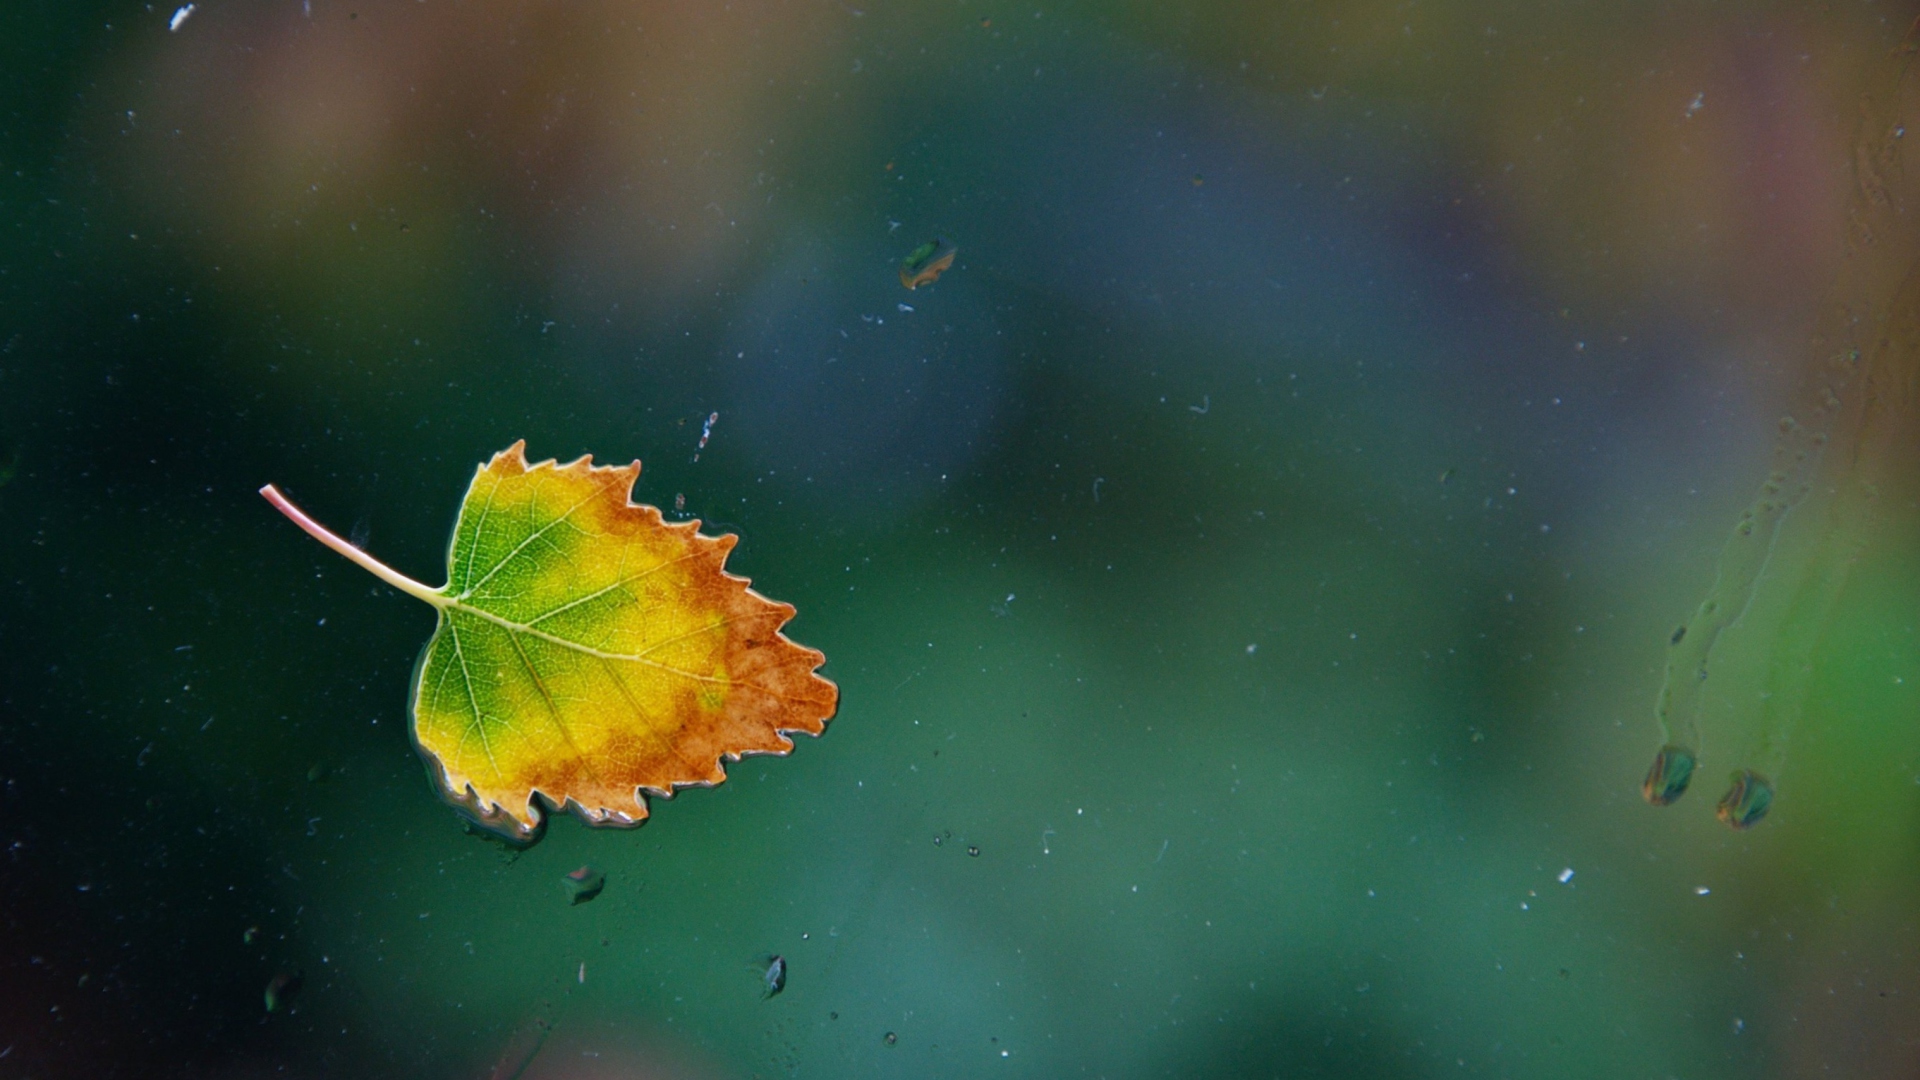 Lonely Autumn Leaf wallpaper 1920x1080